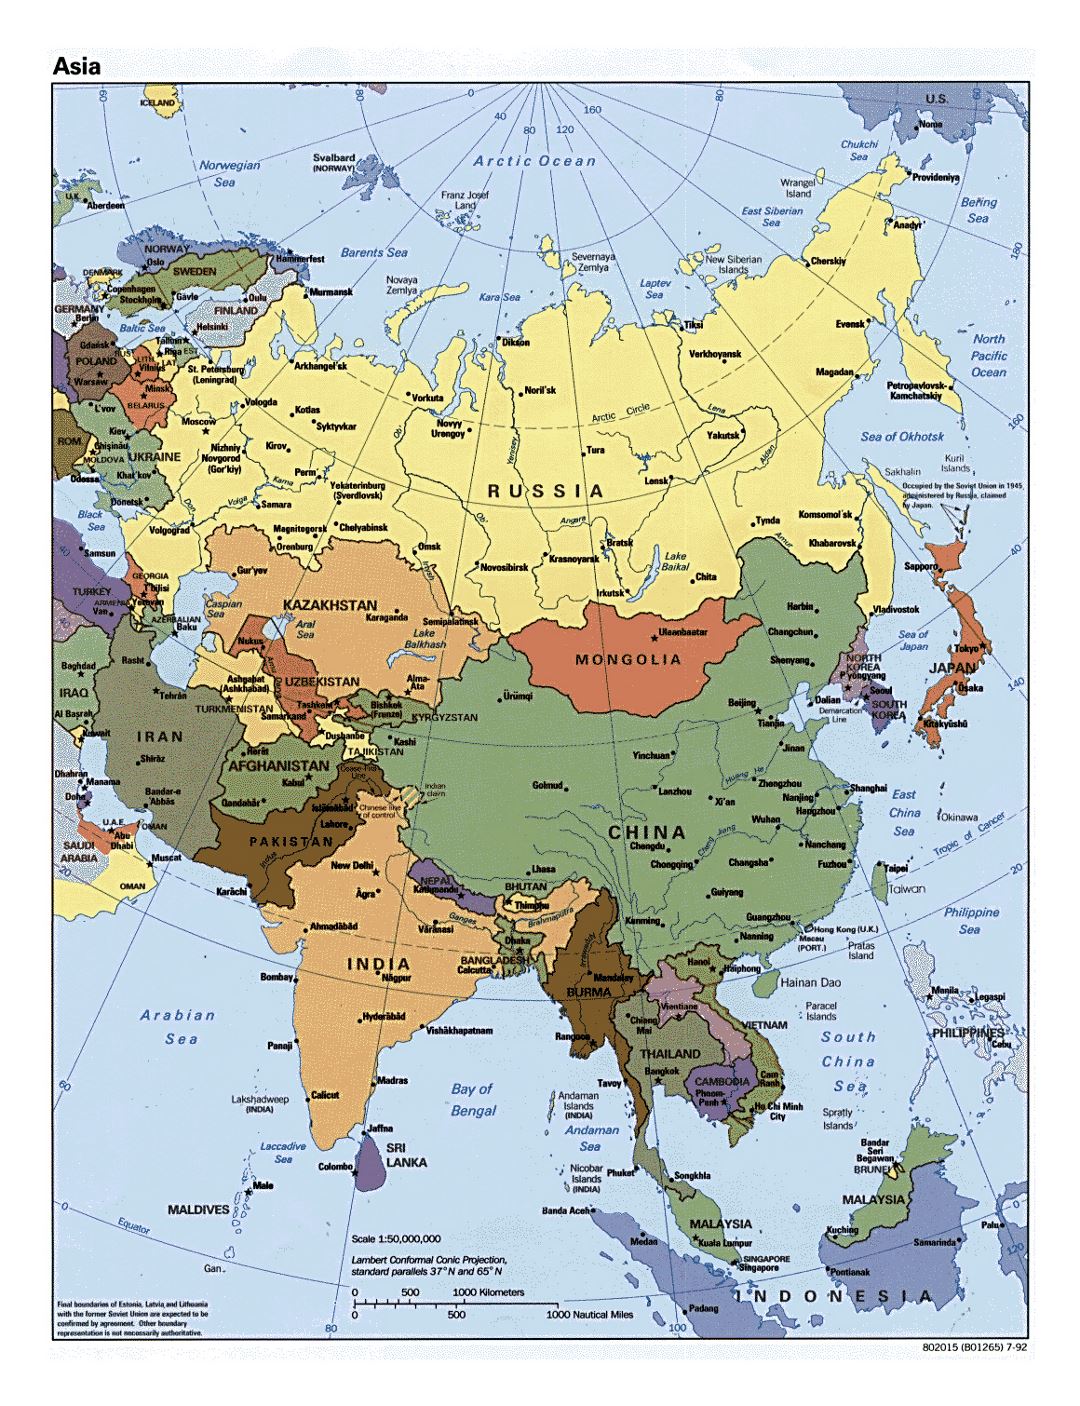 Detailed political map of Asia - 1992